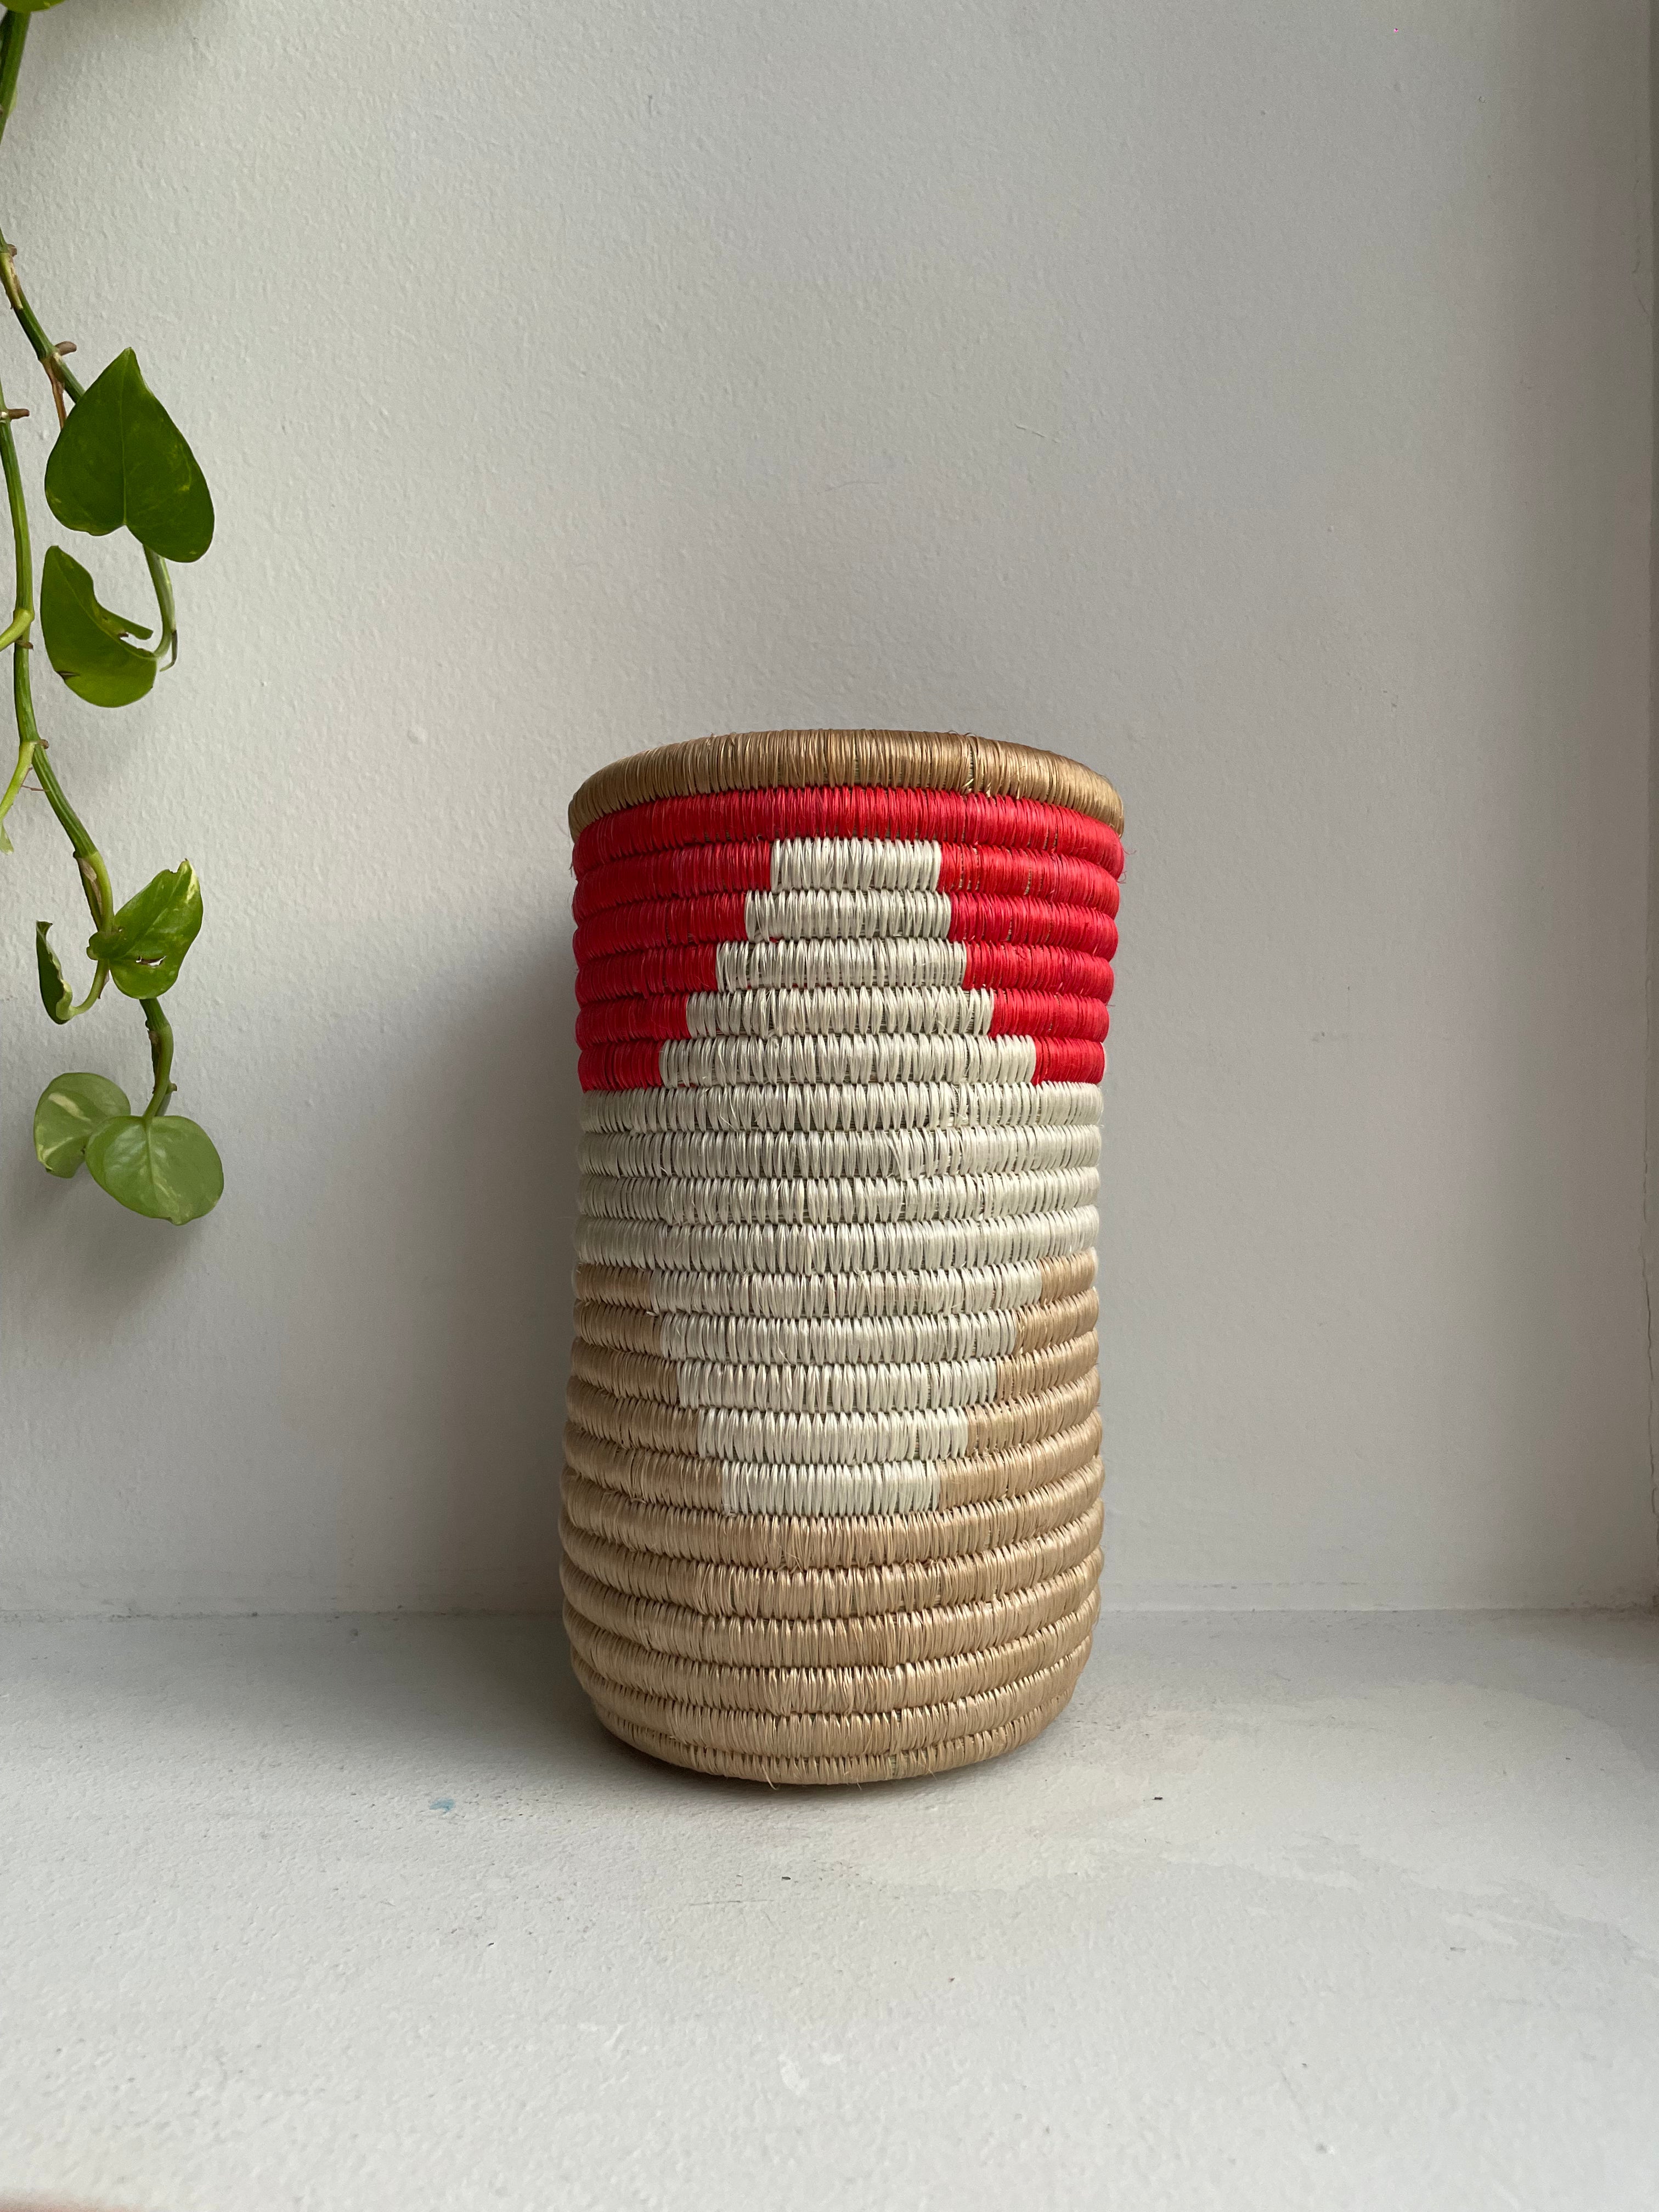 Display of red, white and beige colored vase